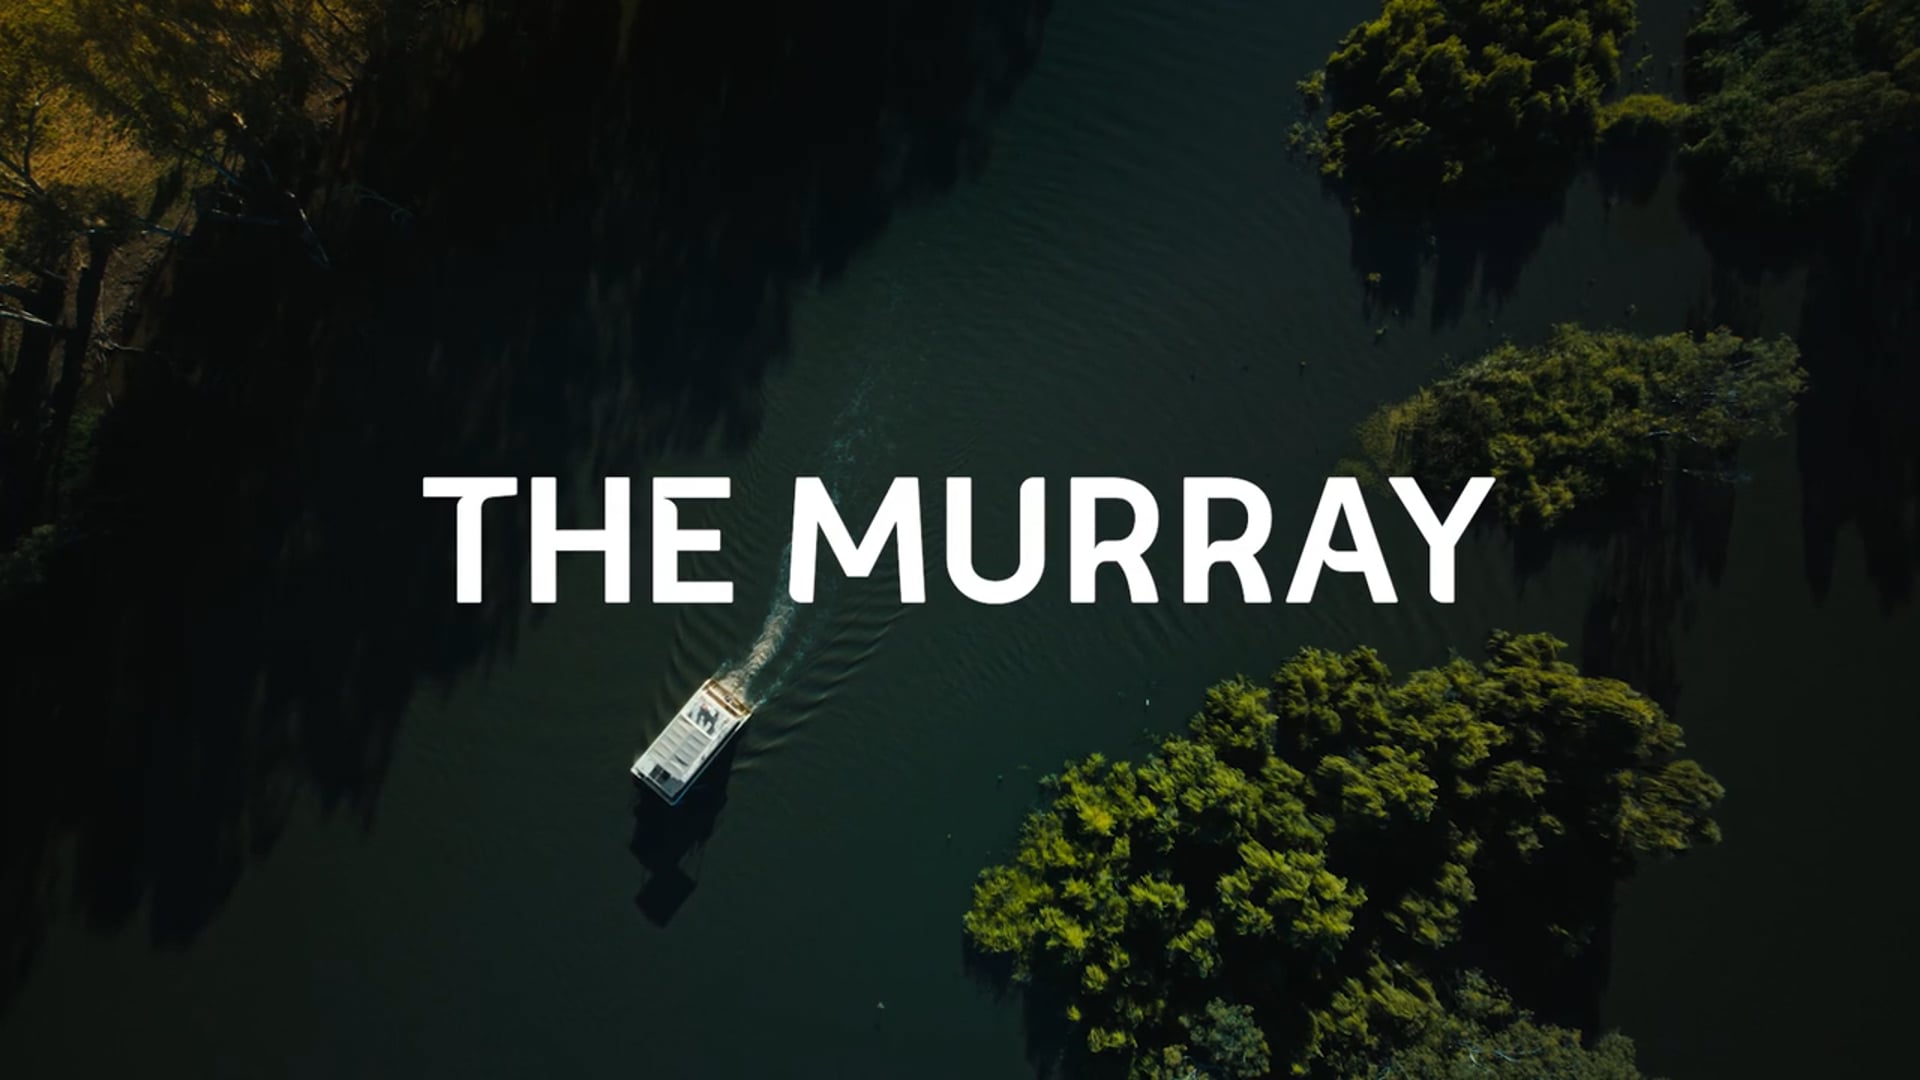 Feel New in the Murray